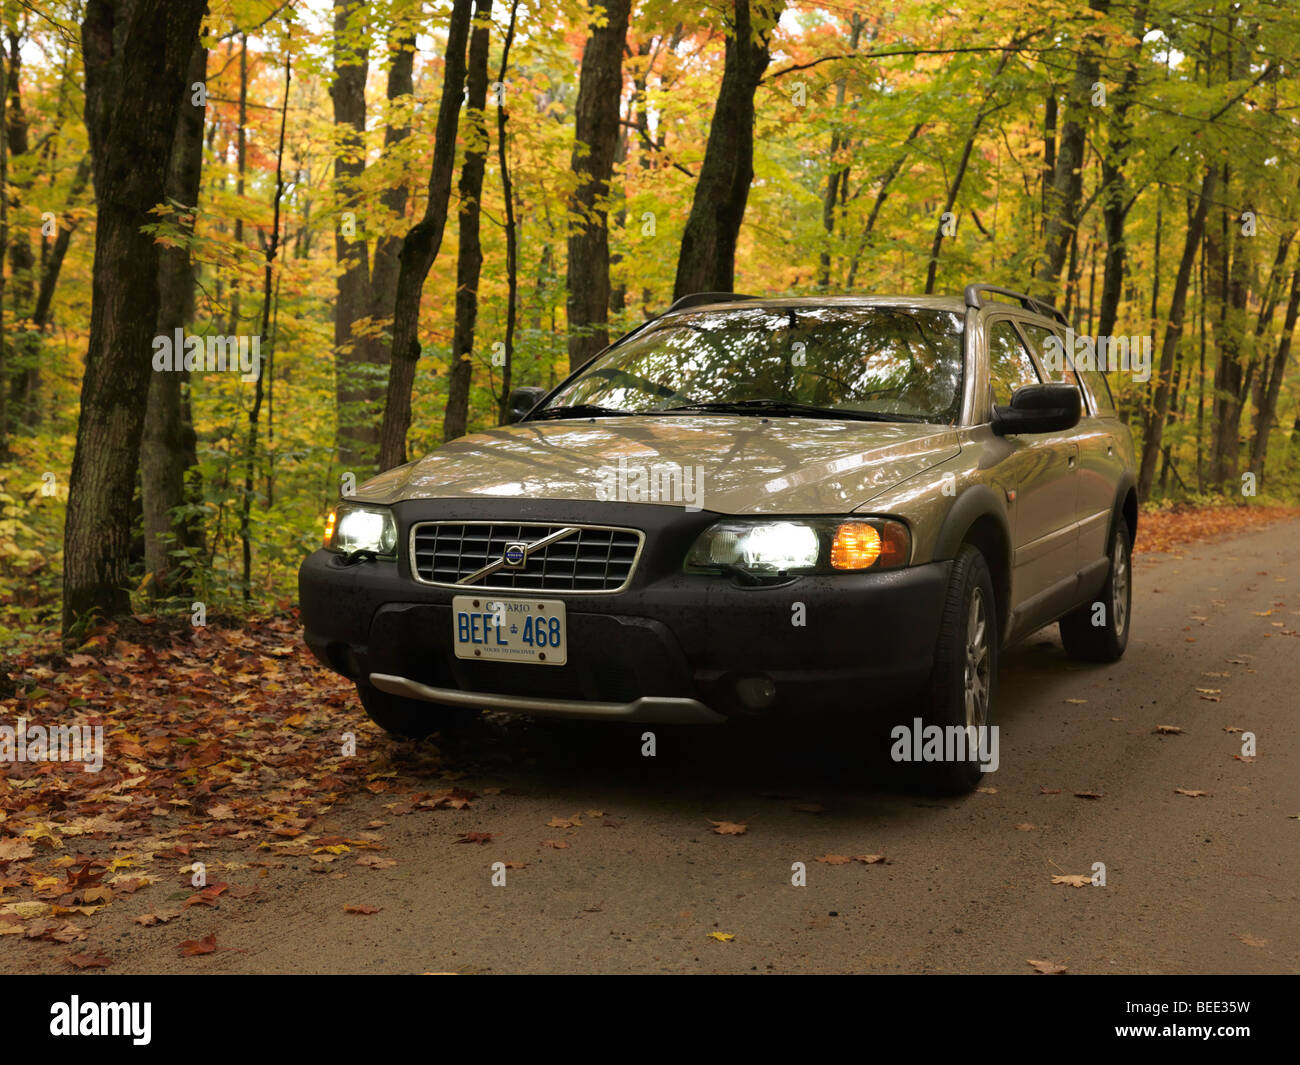 Volvo XC70 on a country road in fall nature scenery. Stock Photo